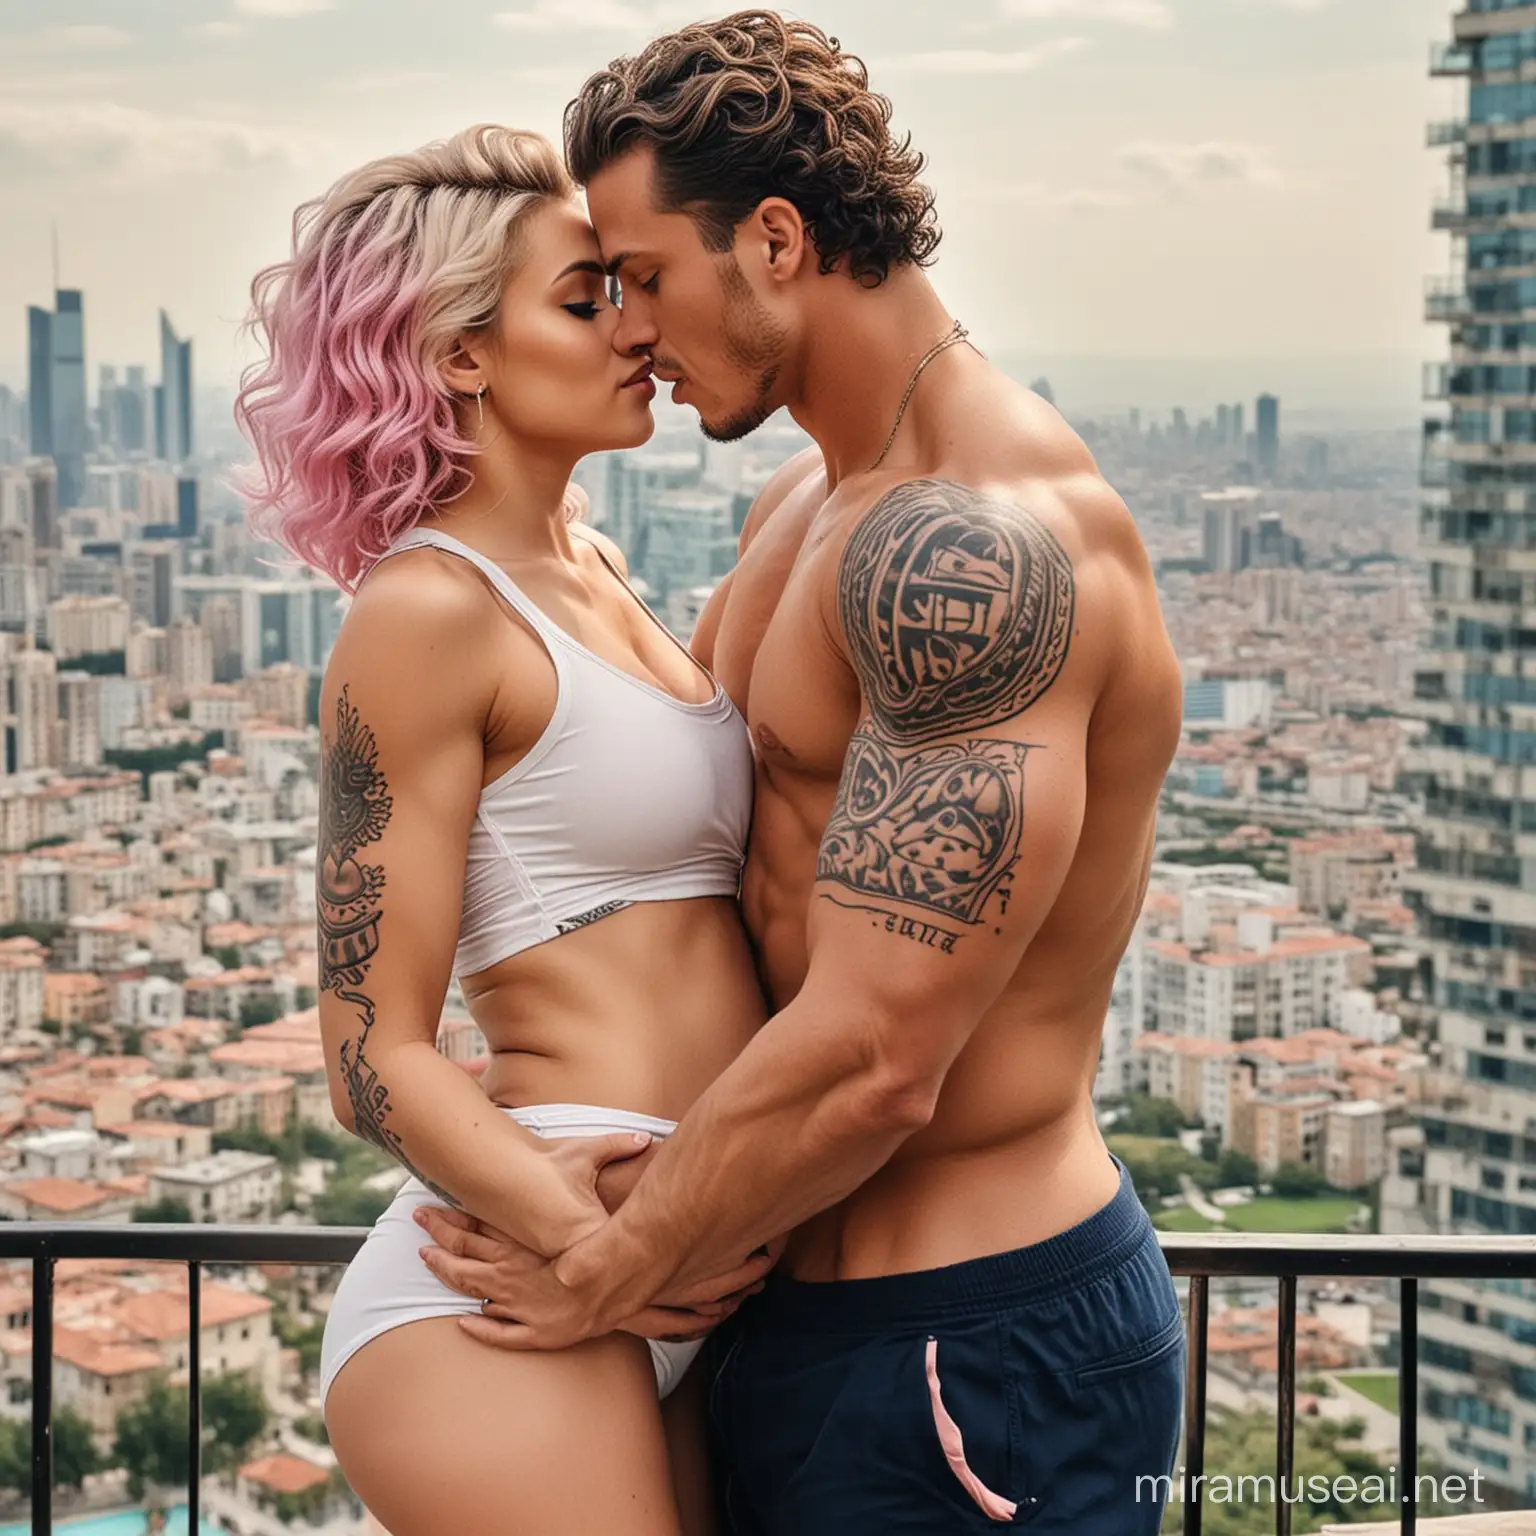 generate a picture of a muscular man who is a football player, has a checkered stomach and a big penis, has light brown short curly hair and blue color, he has tattoos on his arms. This man has a beautiful wife who is pregnant, the woman is blonde and pink, her hair is blue, they are very rich, the woman is the daughter of a king 👑, and the man is a talented soccer player. in the background a large skyscraper is visible from their luxurious 7-story high villa. The woman should be pregnant and show it  the man's cute wife is also with him  ♥️♥️the woman and the man are kissing  